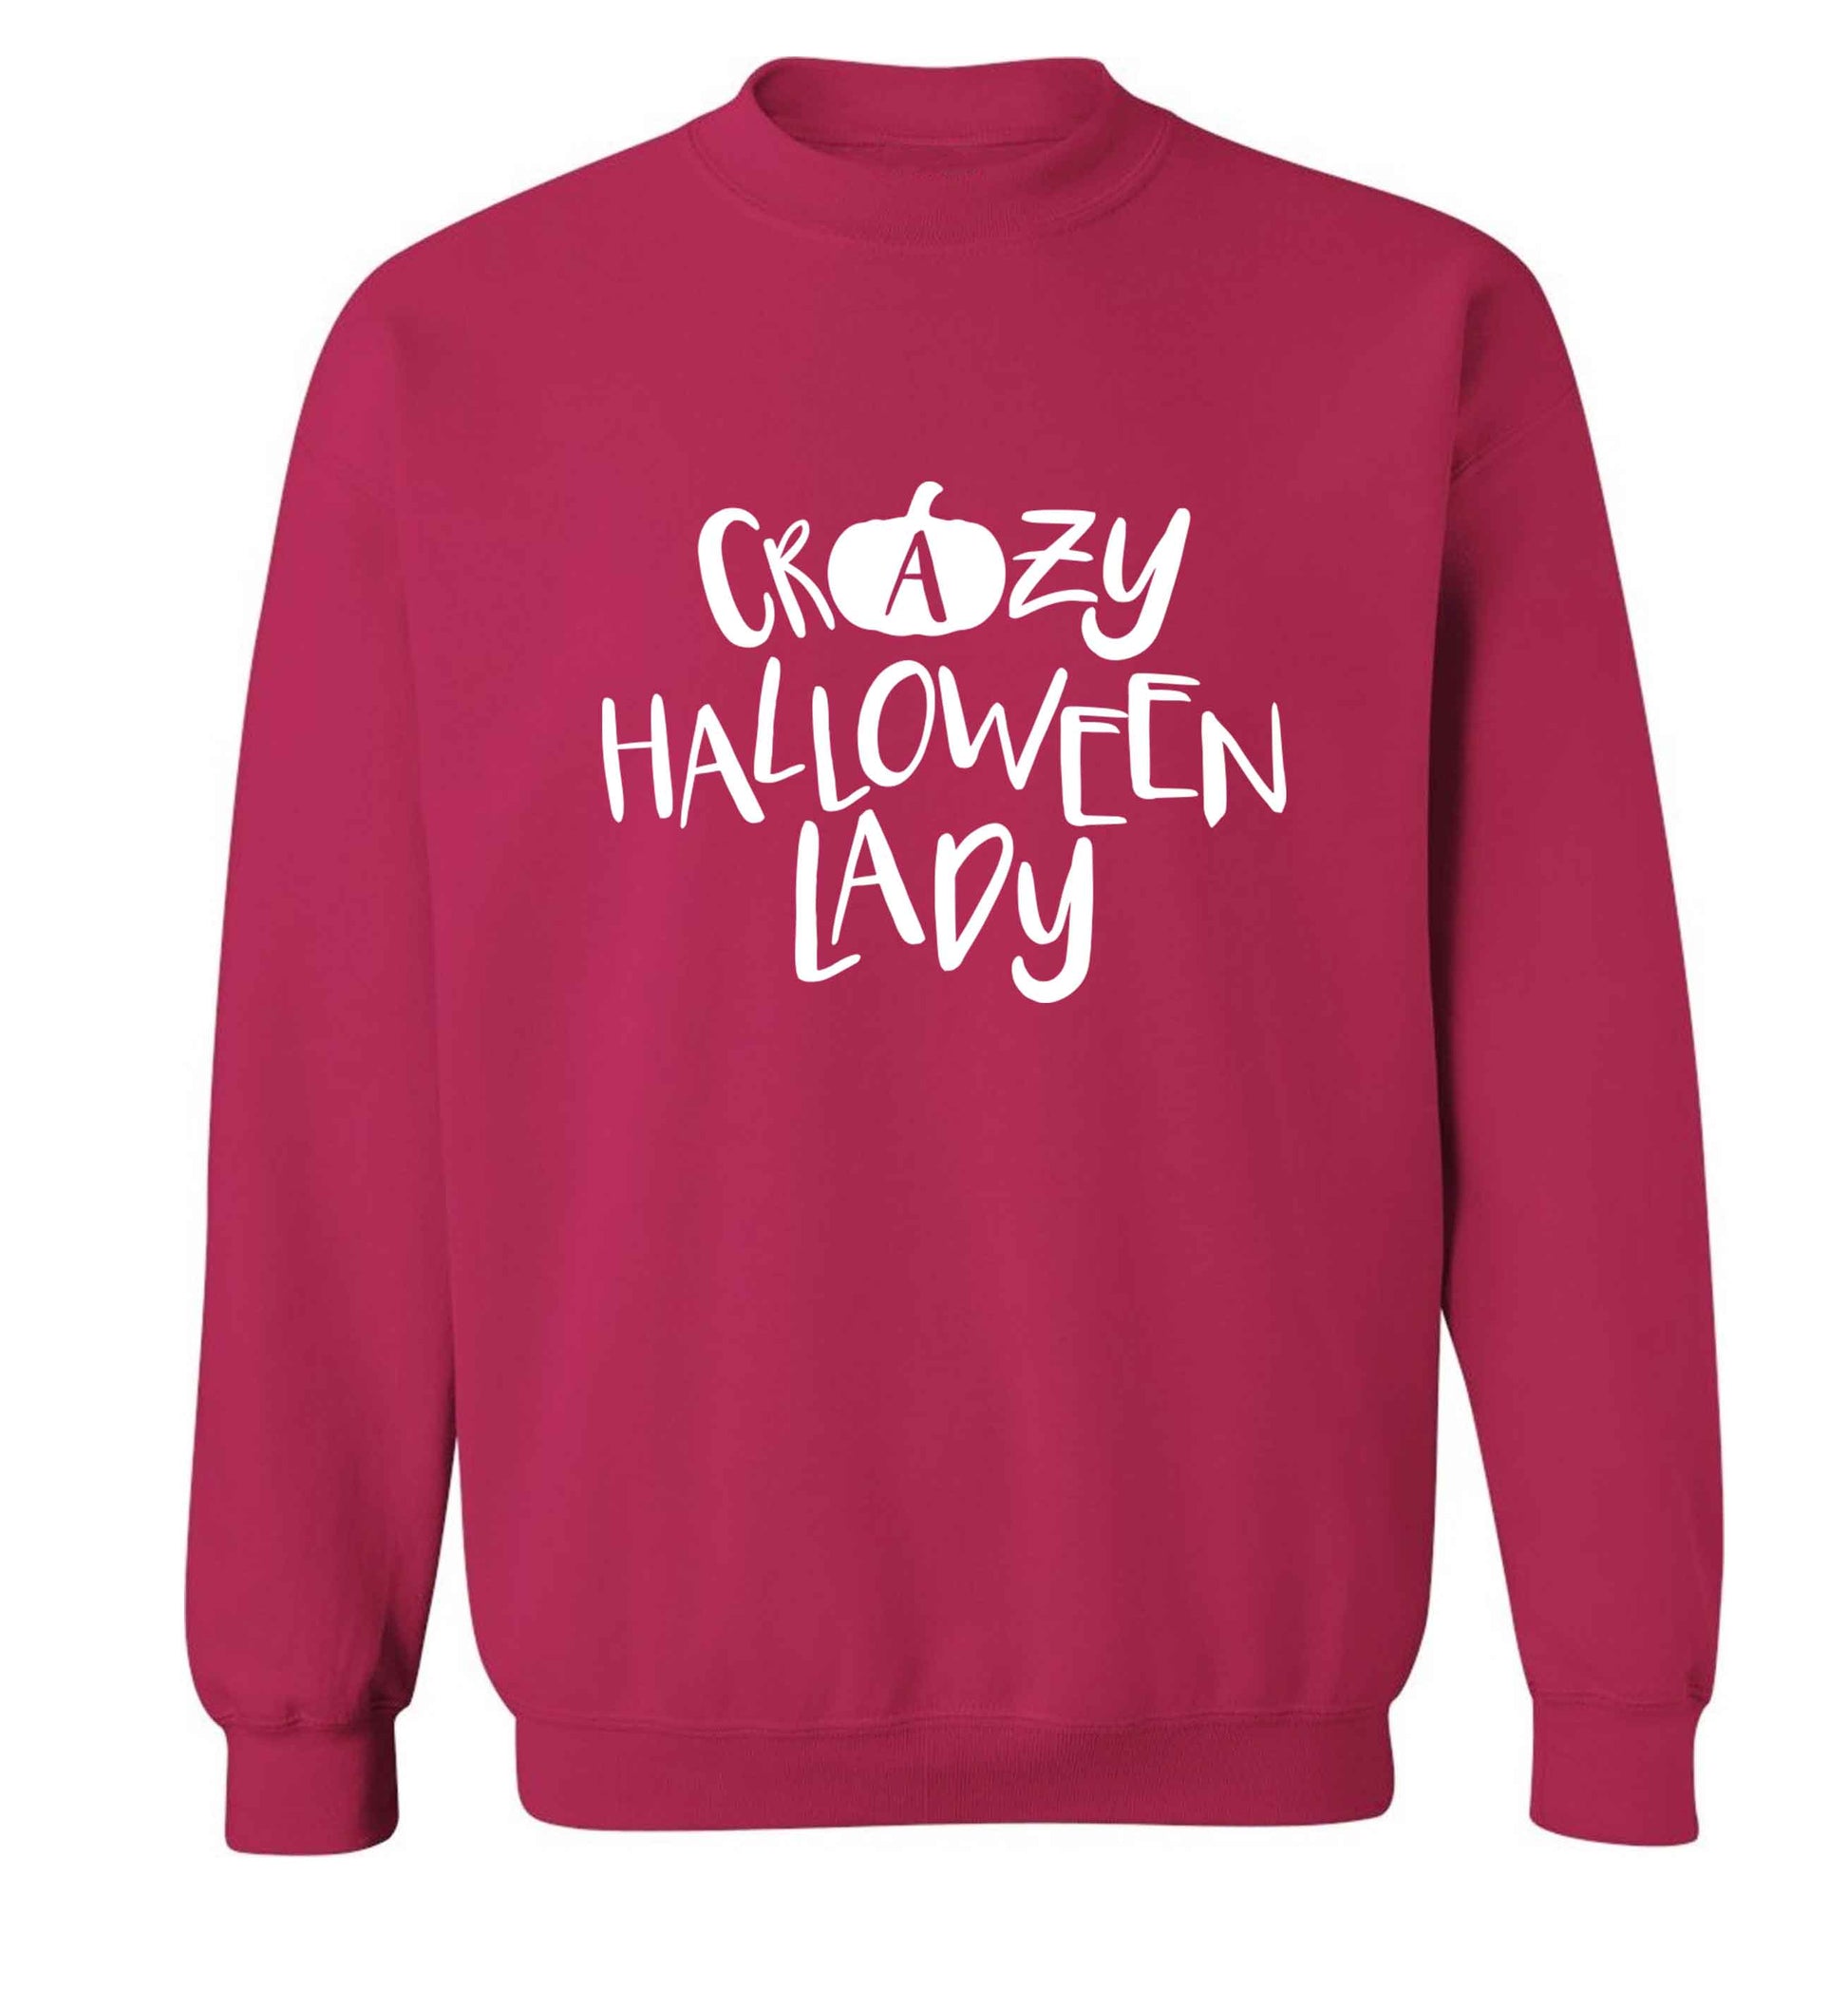 Crazy halloween lady adult's unisex pink sweater 2XL